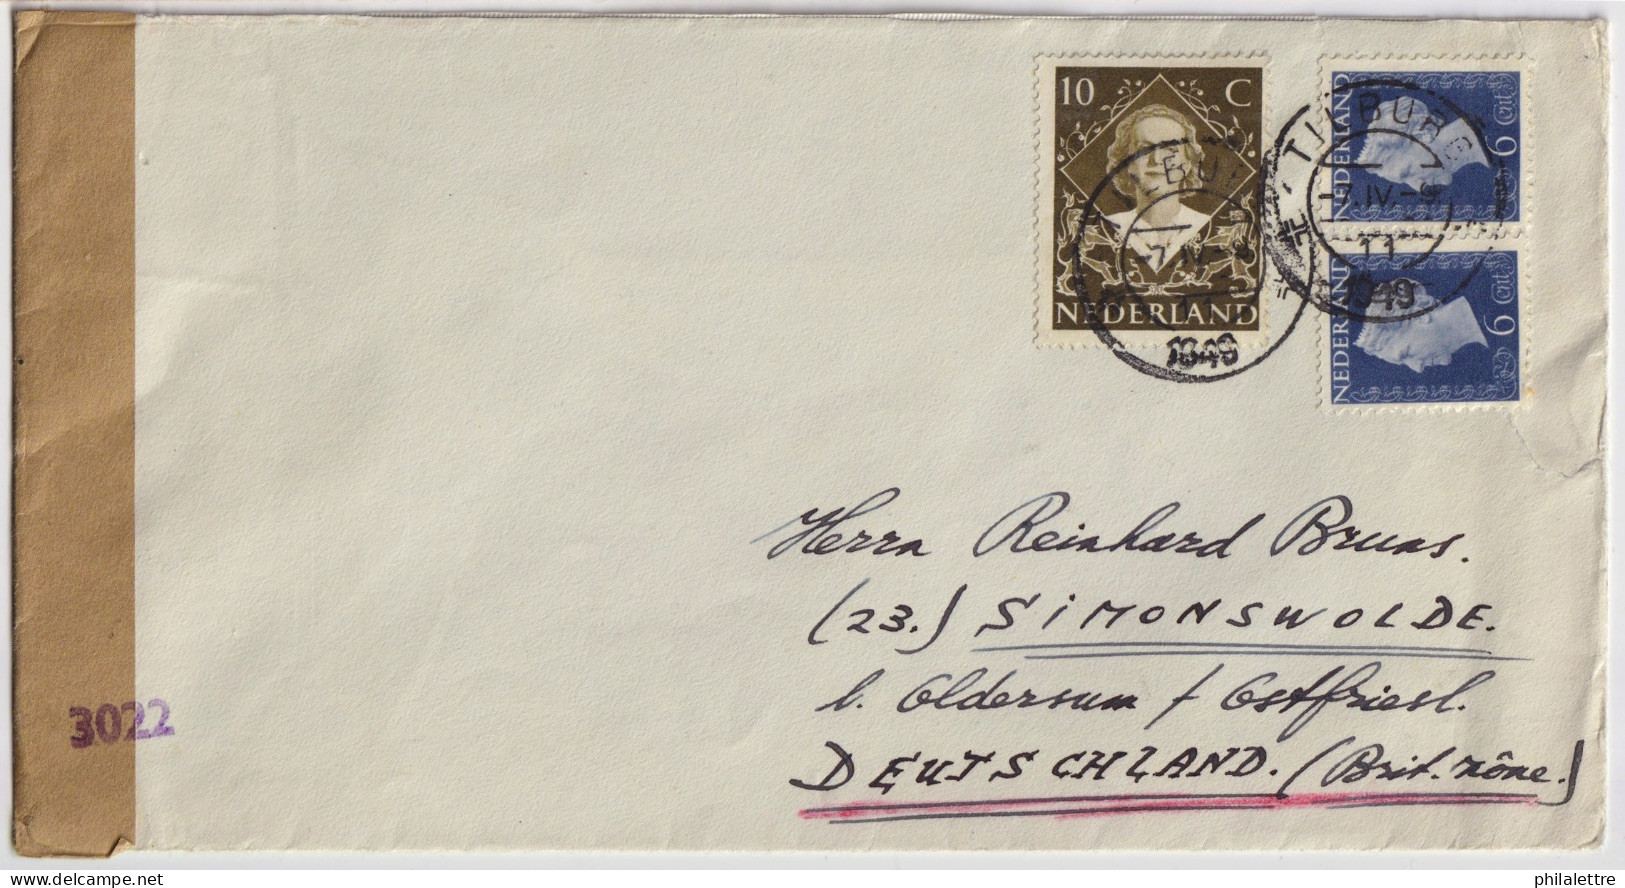 PAYS-BAS / THE NETHERLANDS - 1949 Mi.479 (x2) & Mi.609 On Censored Cover From TILBURG To SIMONSWOLDE, Germany - Briefe U. Dokumente